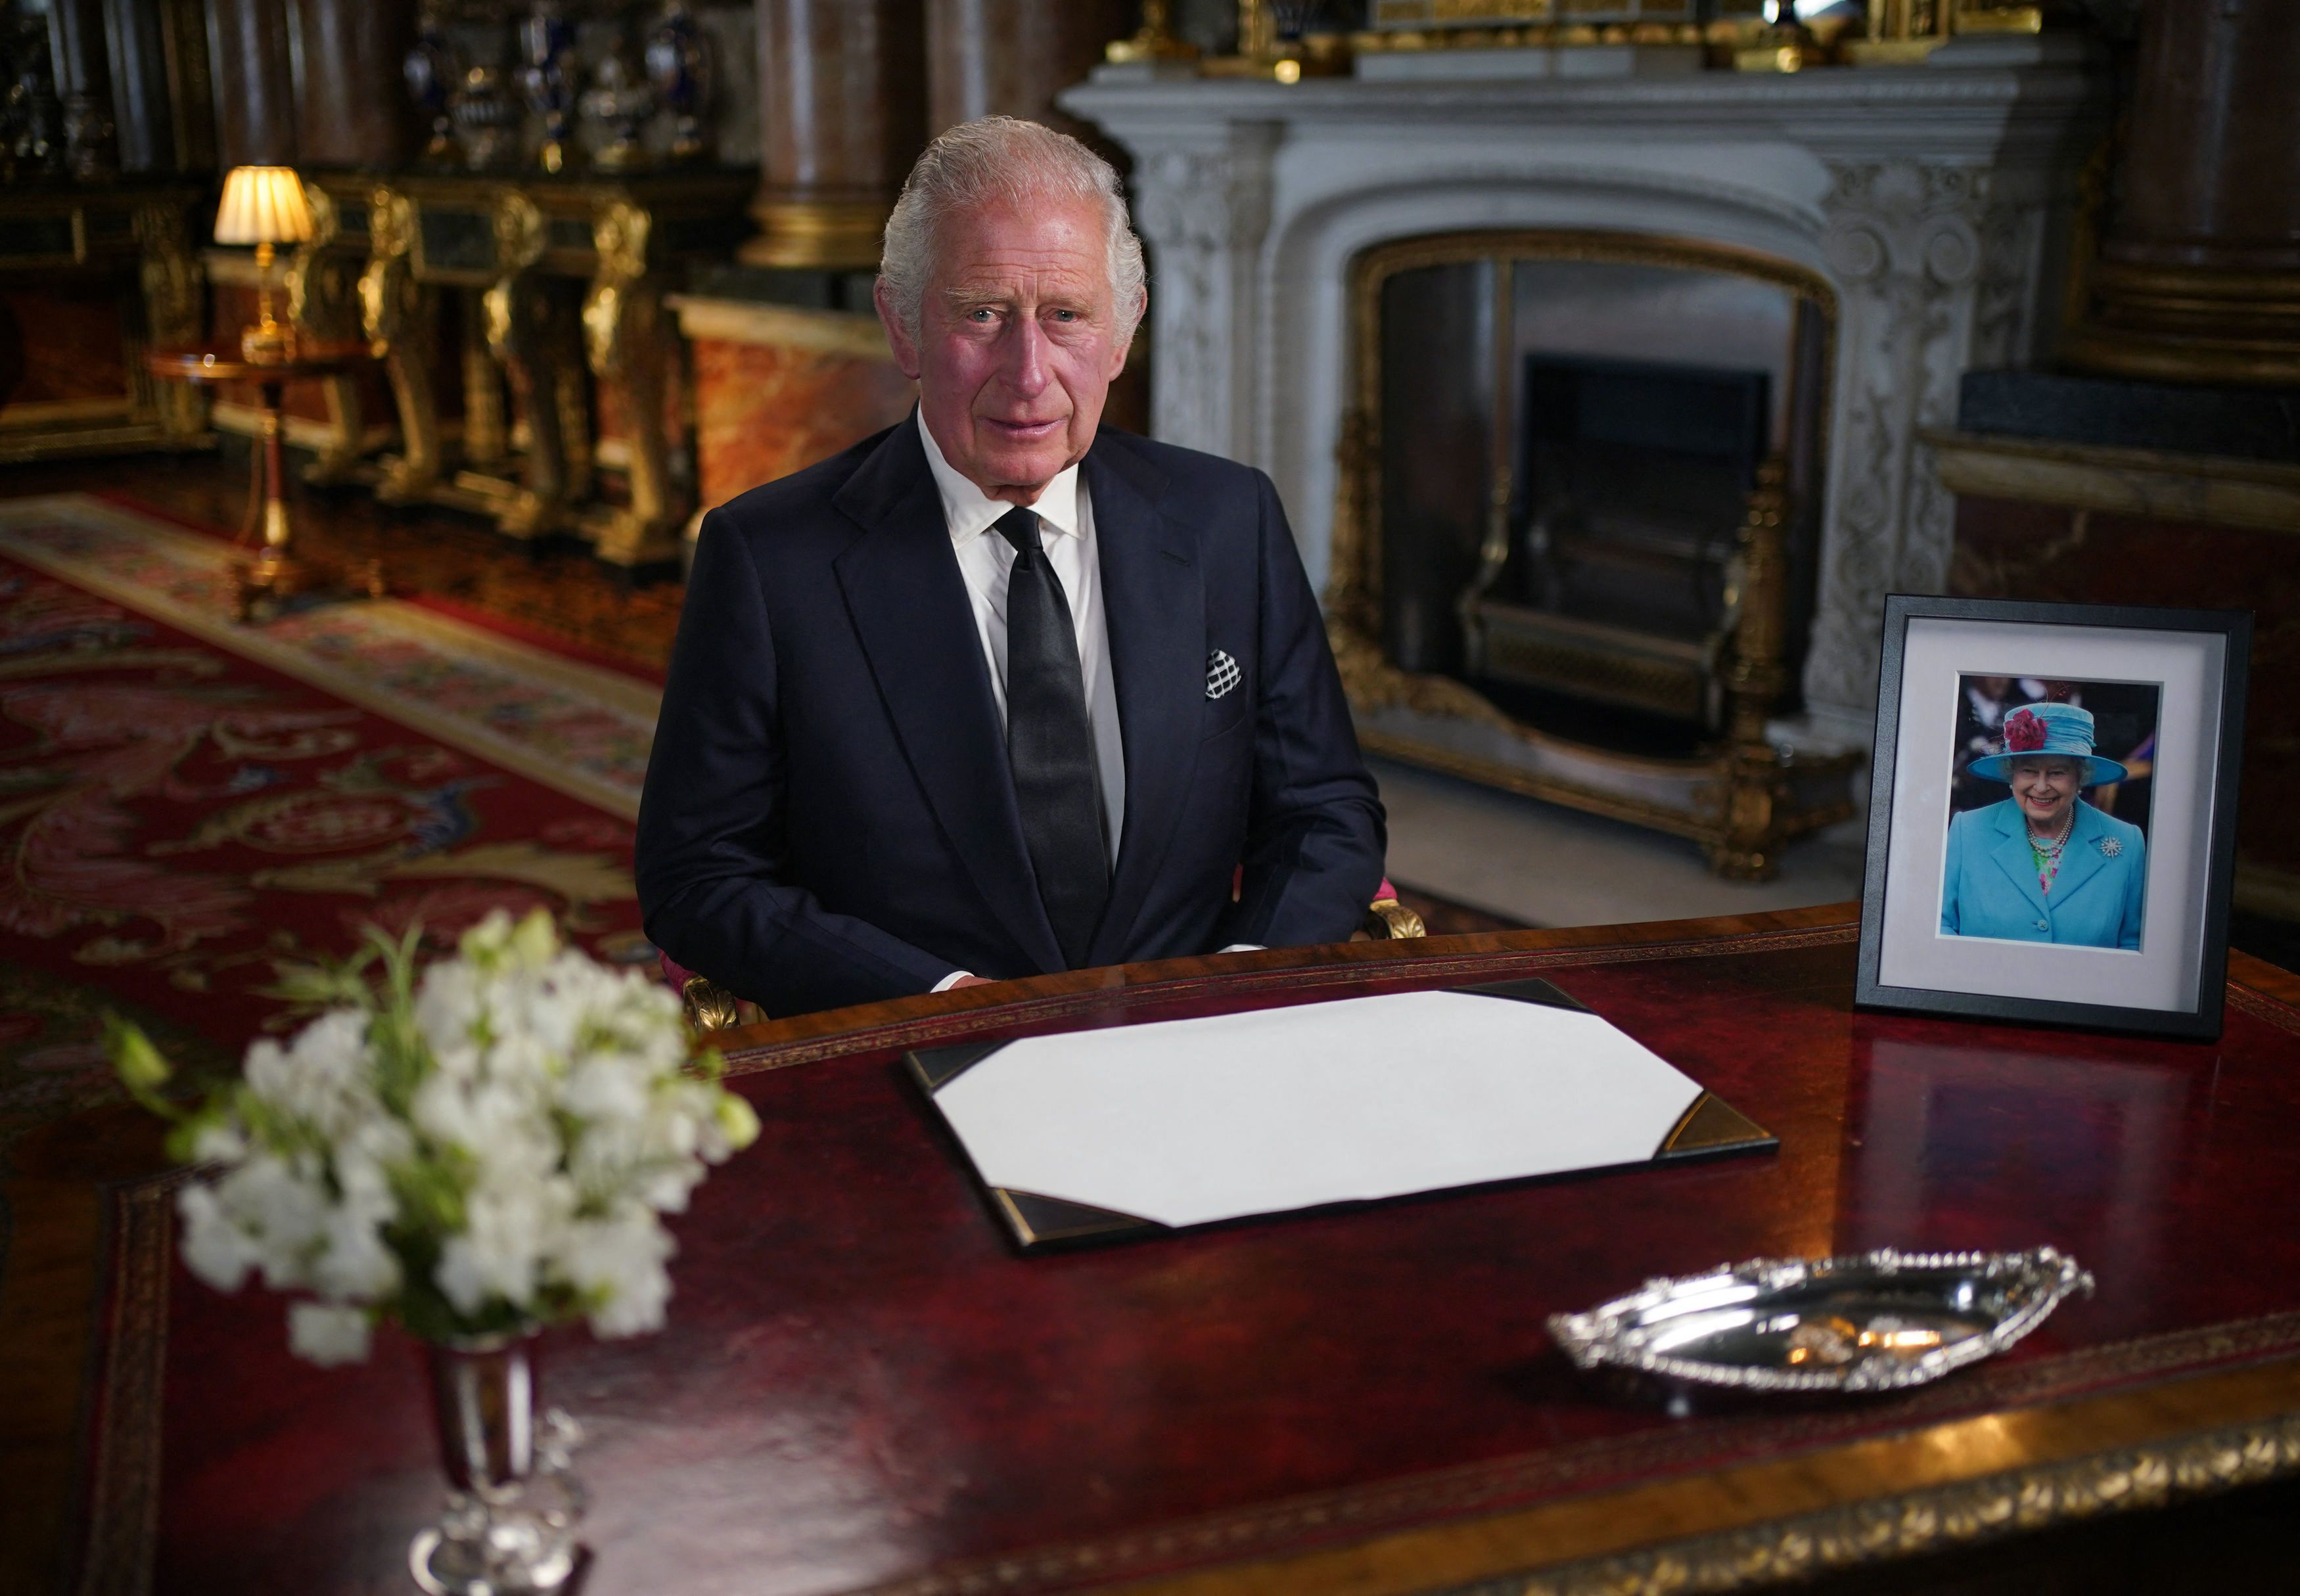 10 interesting facts about King Charles III, the new British monarch BreezyScroll